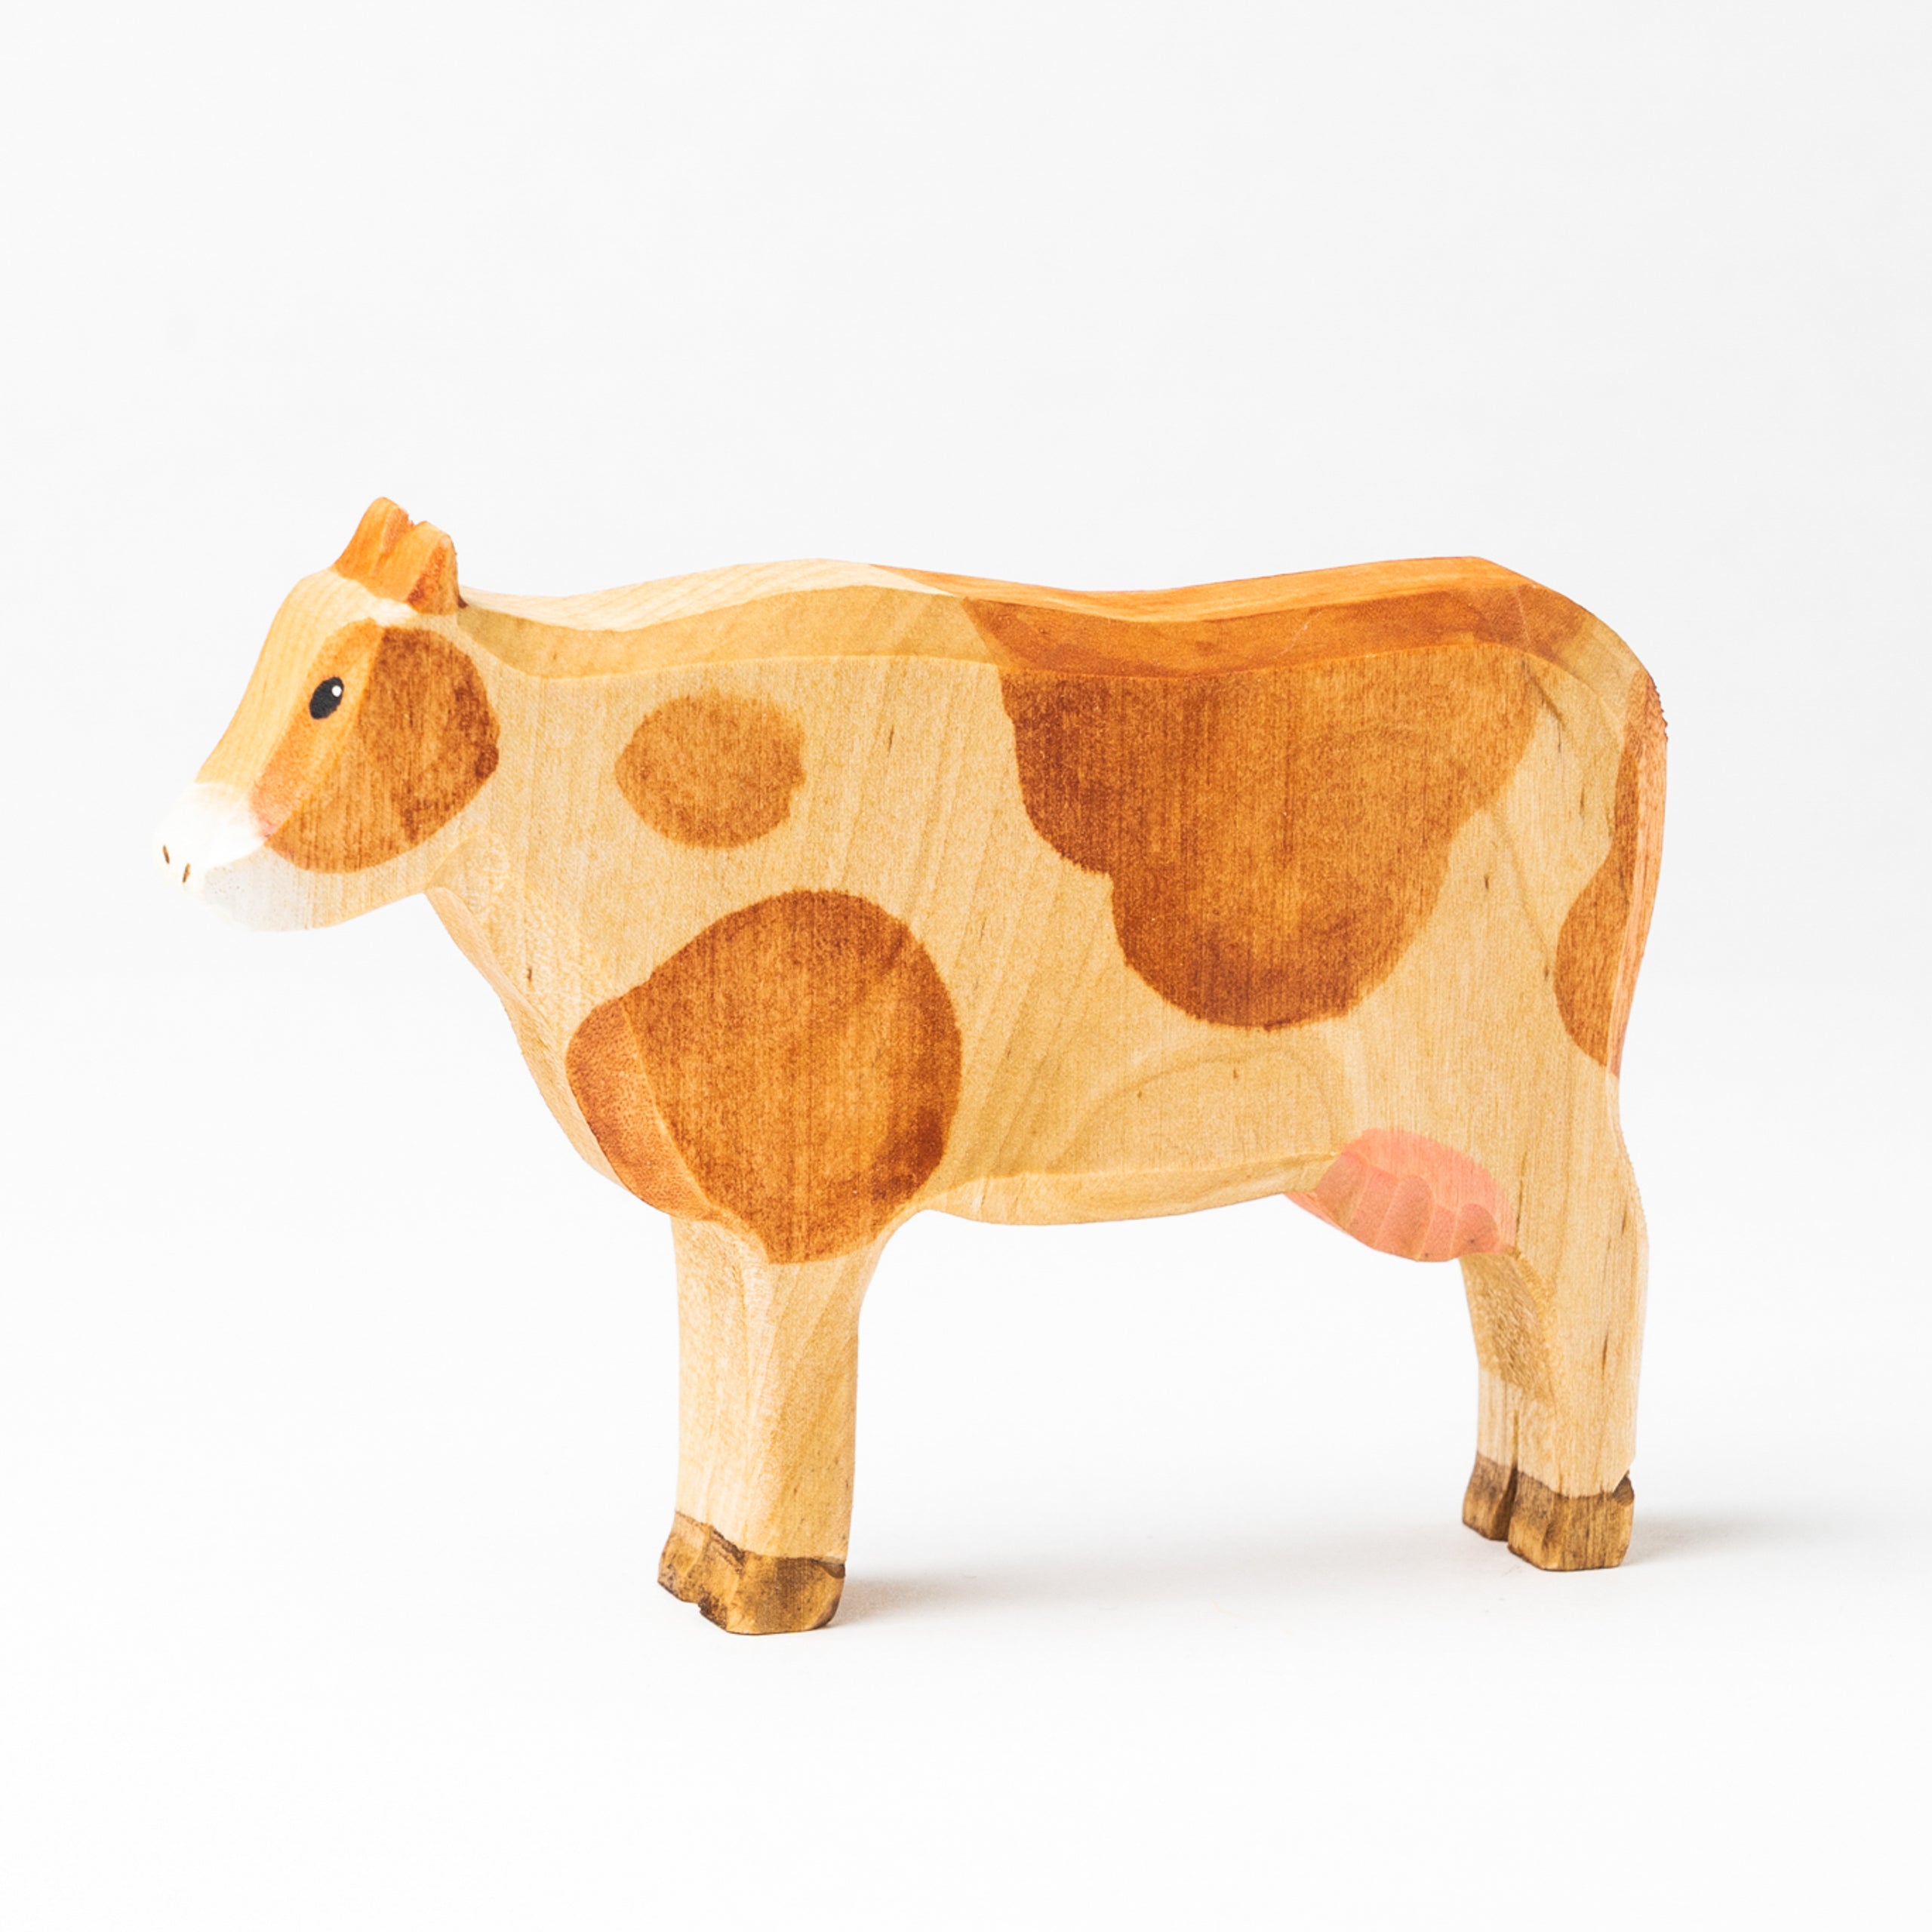 Wooden animals, Baby toys, Wooden toys, Farm animals, Wooden horse, Wooden  farm toys, Waldorf toys, Handmade toys, Foal figurine, Wooden toy